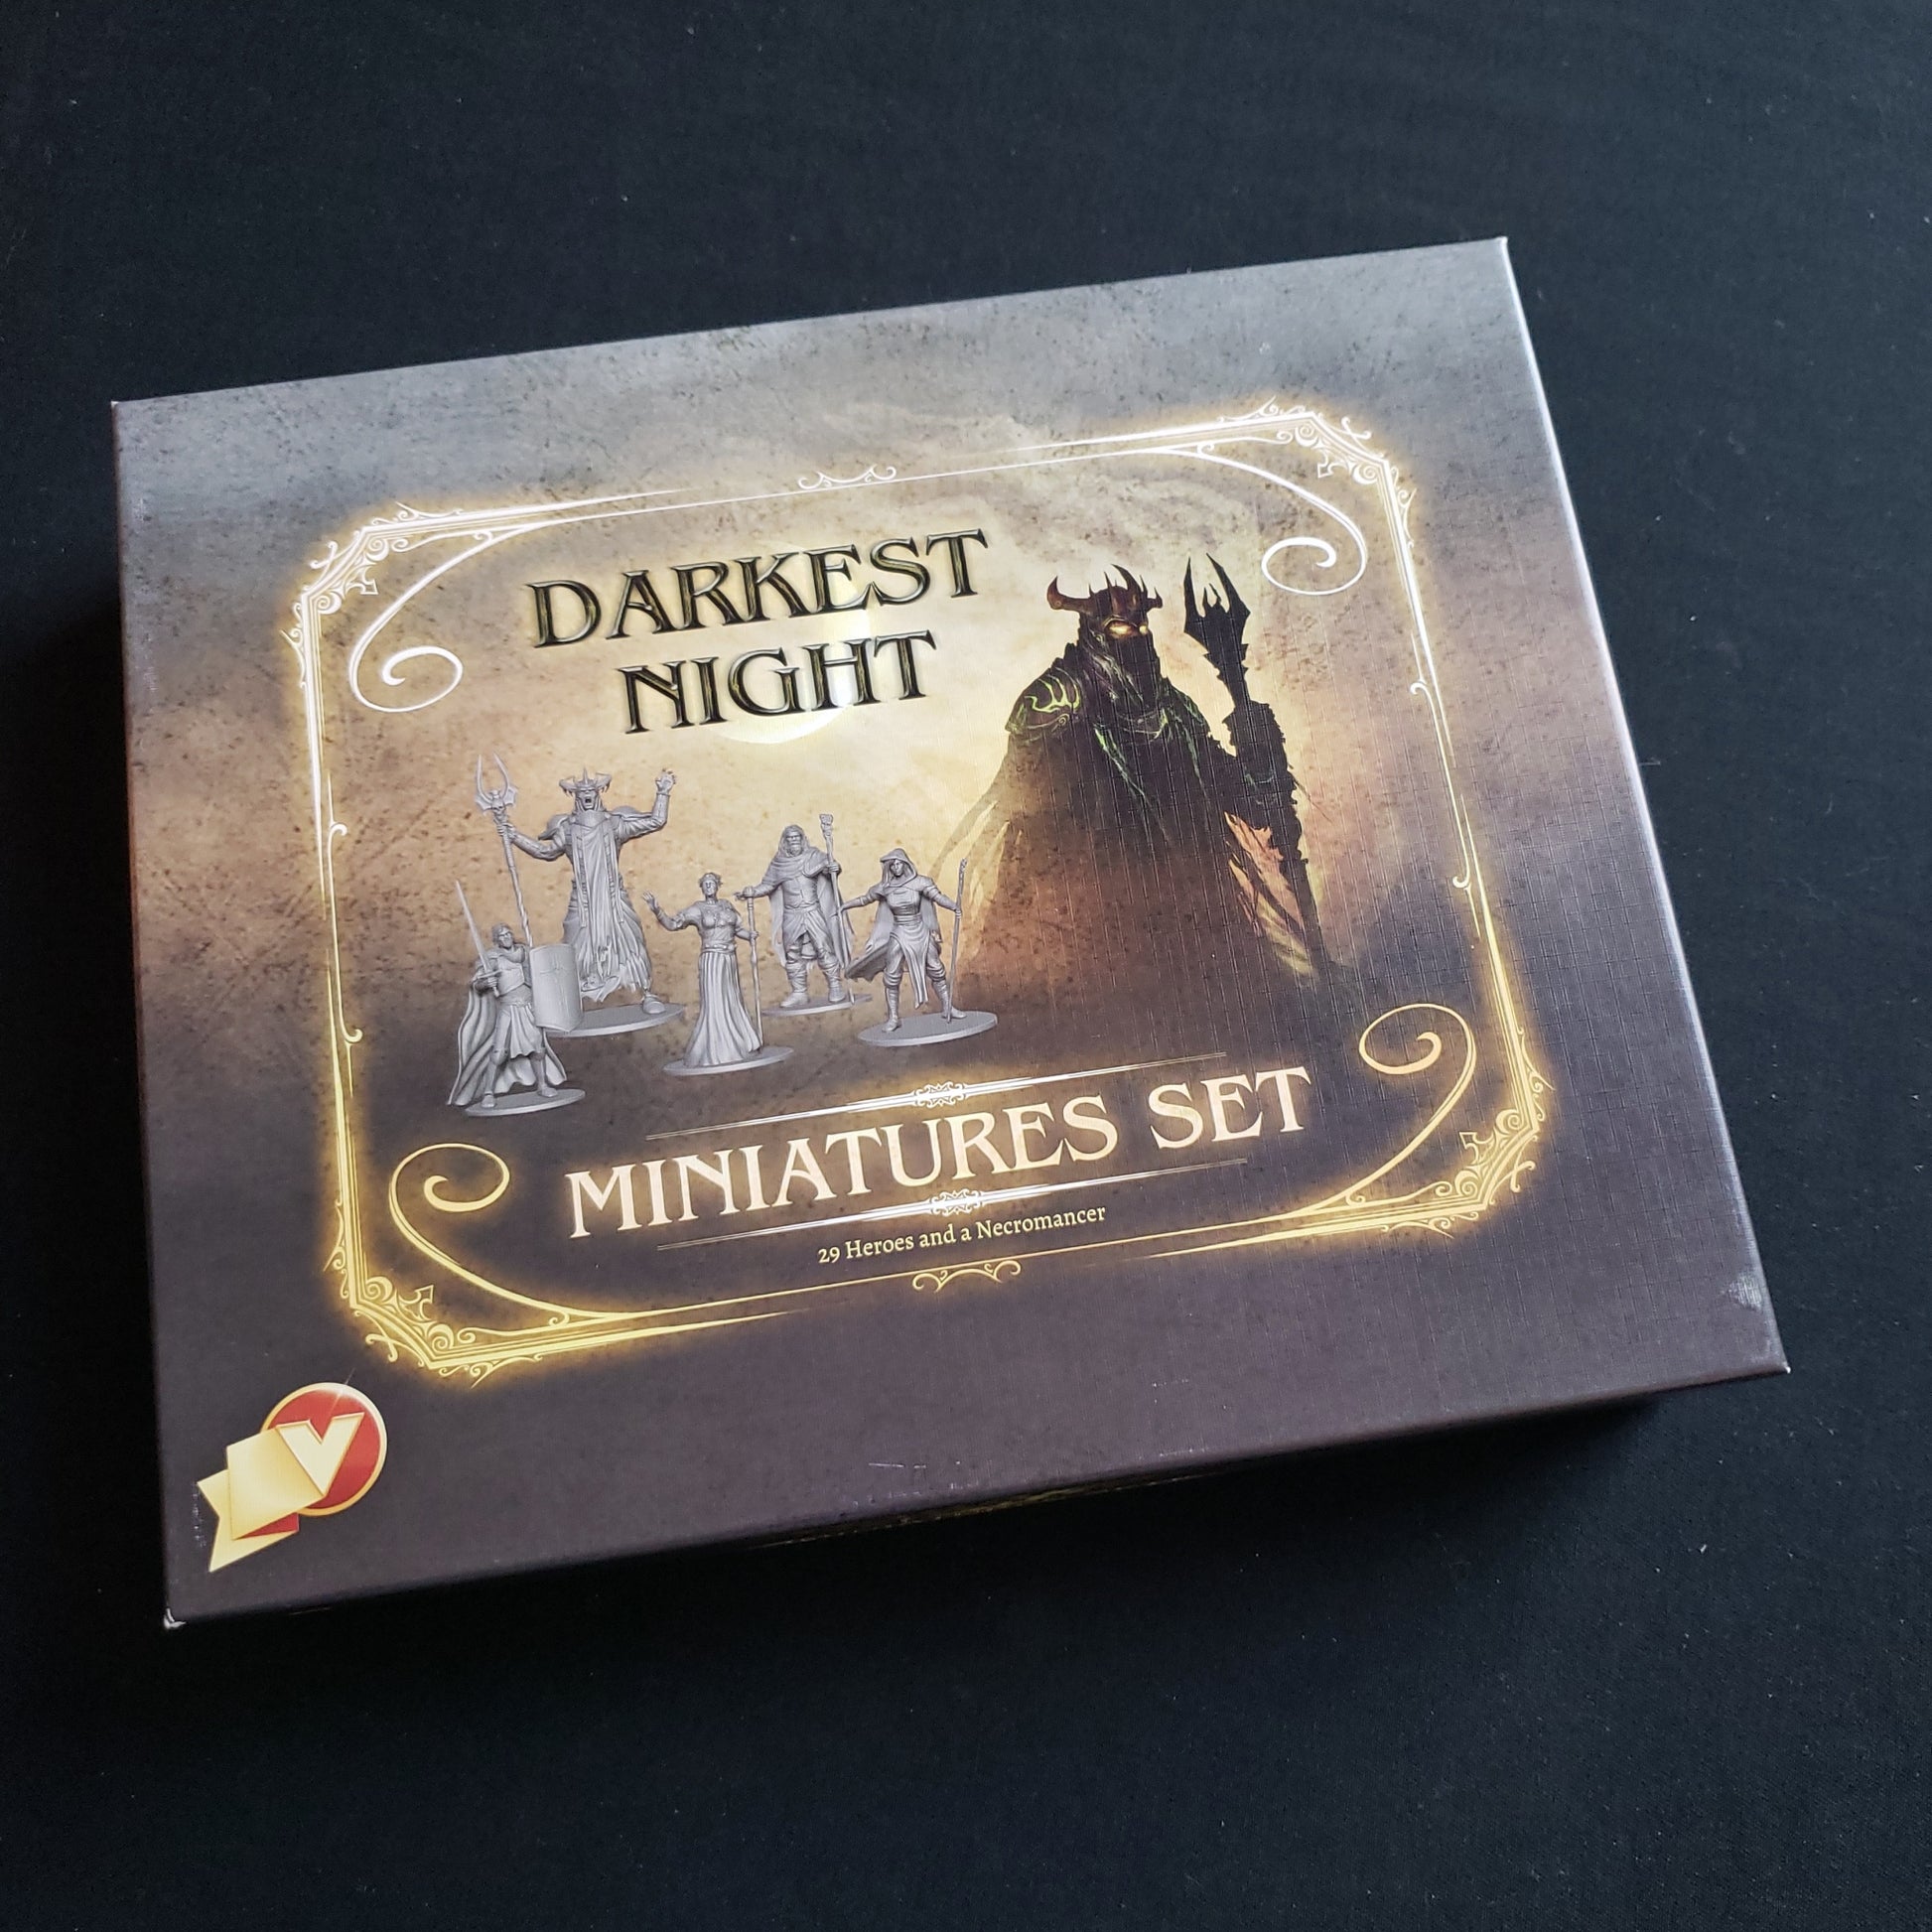 Image shows the front cover of the box of the Miniatures Set addon on for the board game Darkest Night: Second Edition